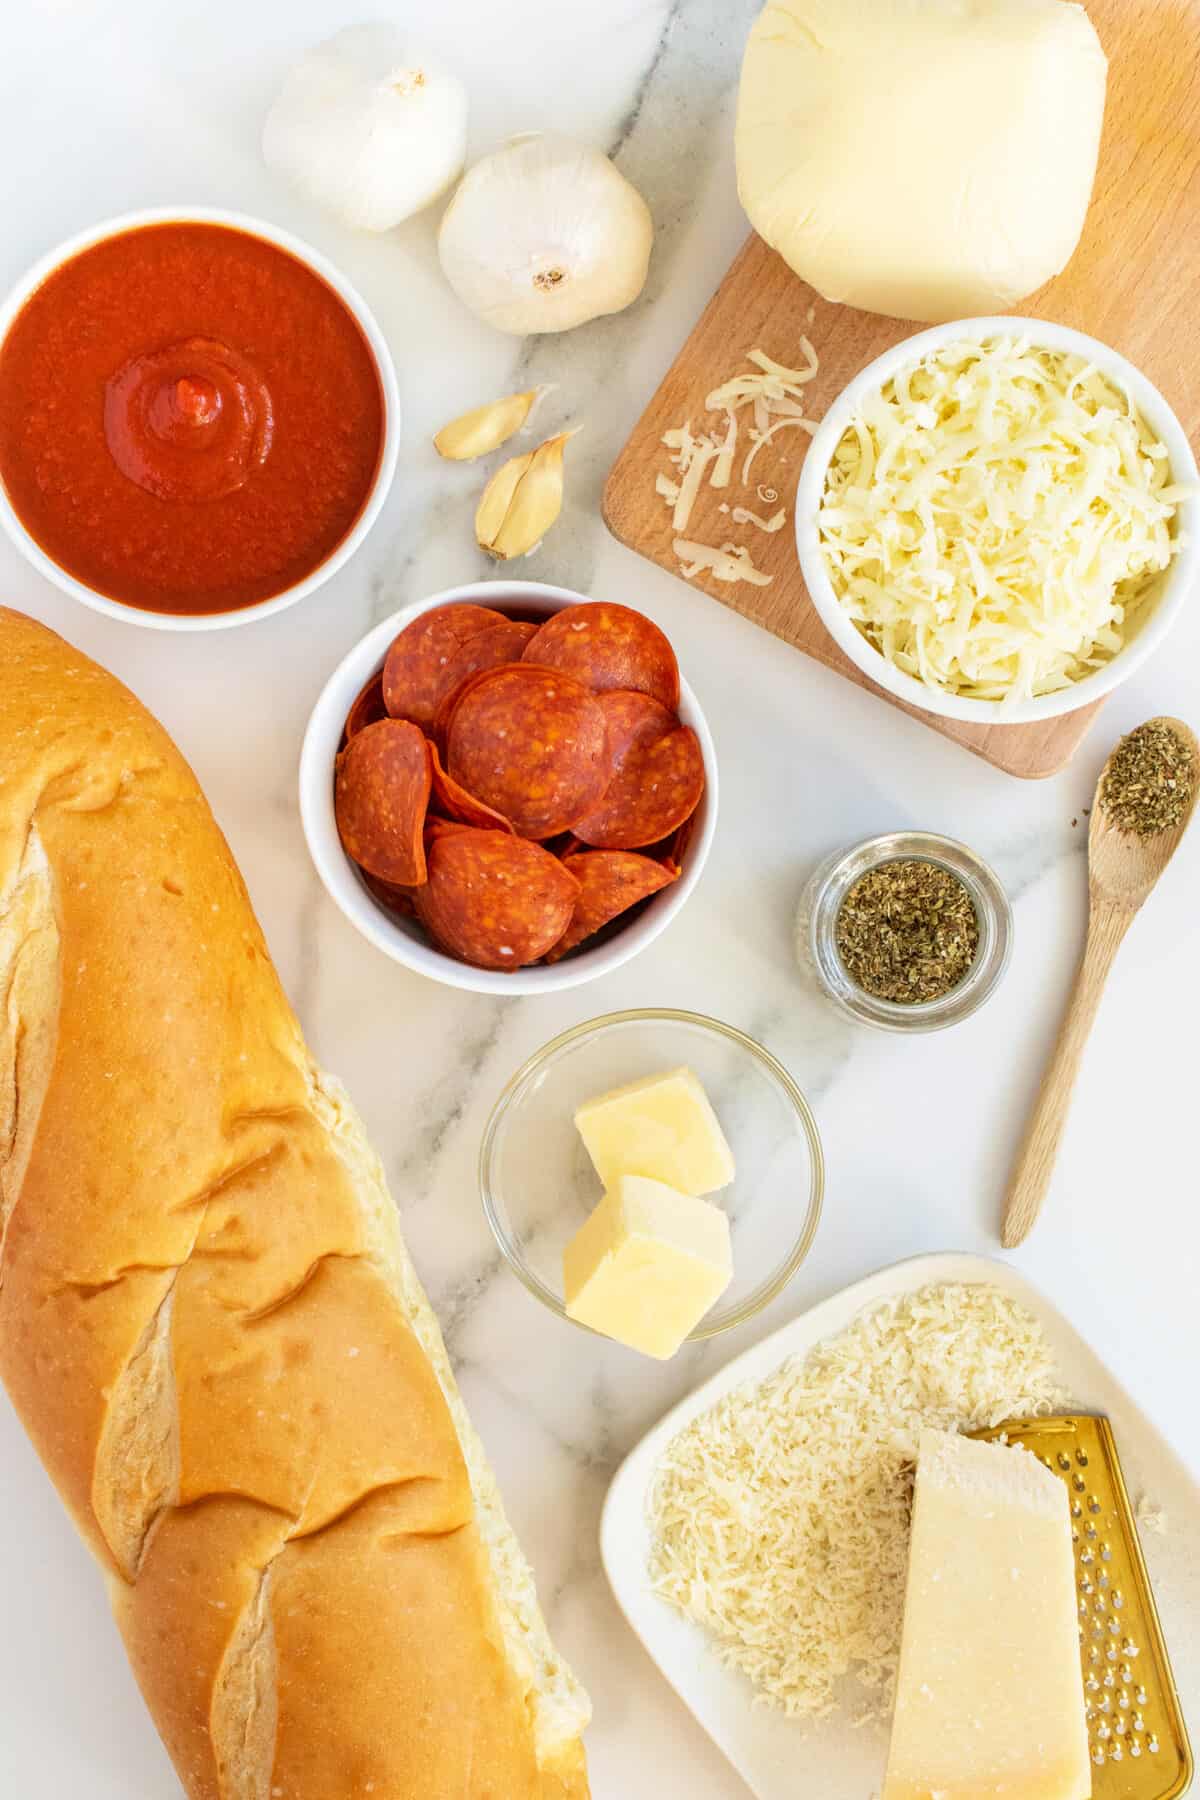 French Bread Pizza ingredients in small white bowls